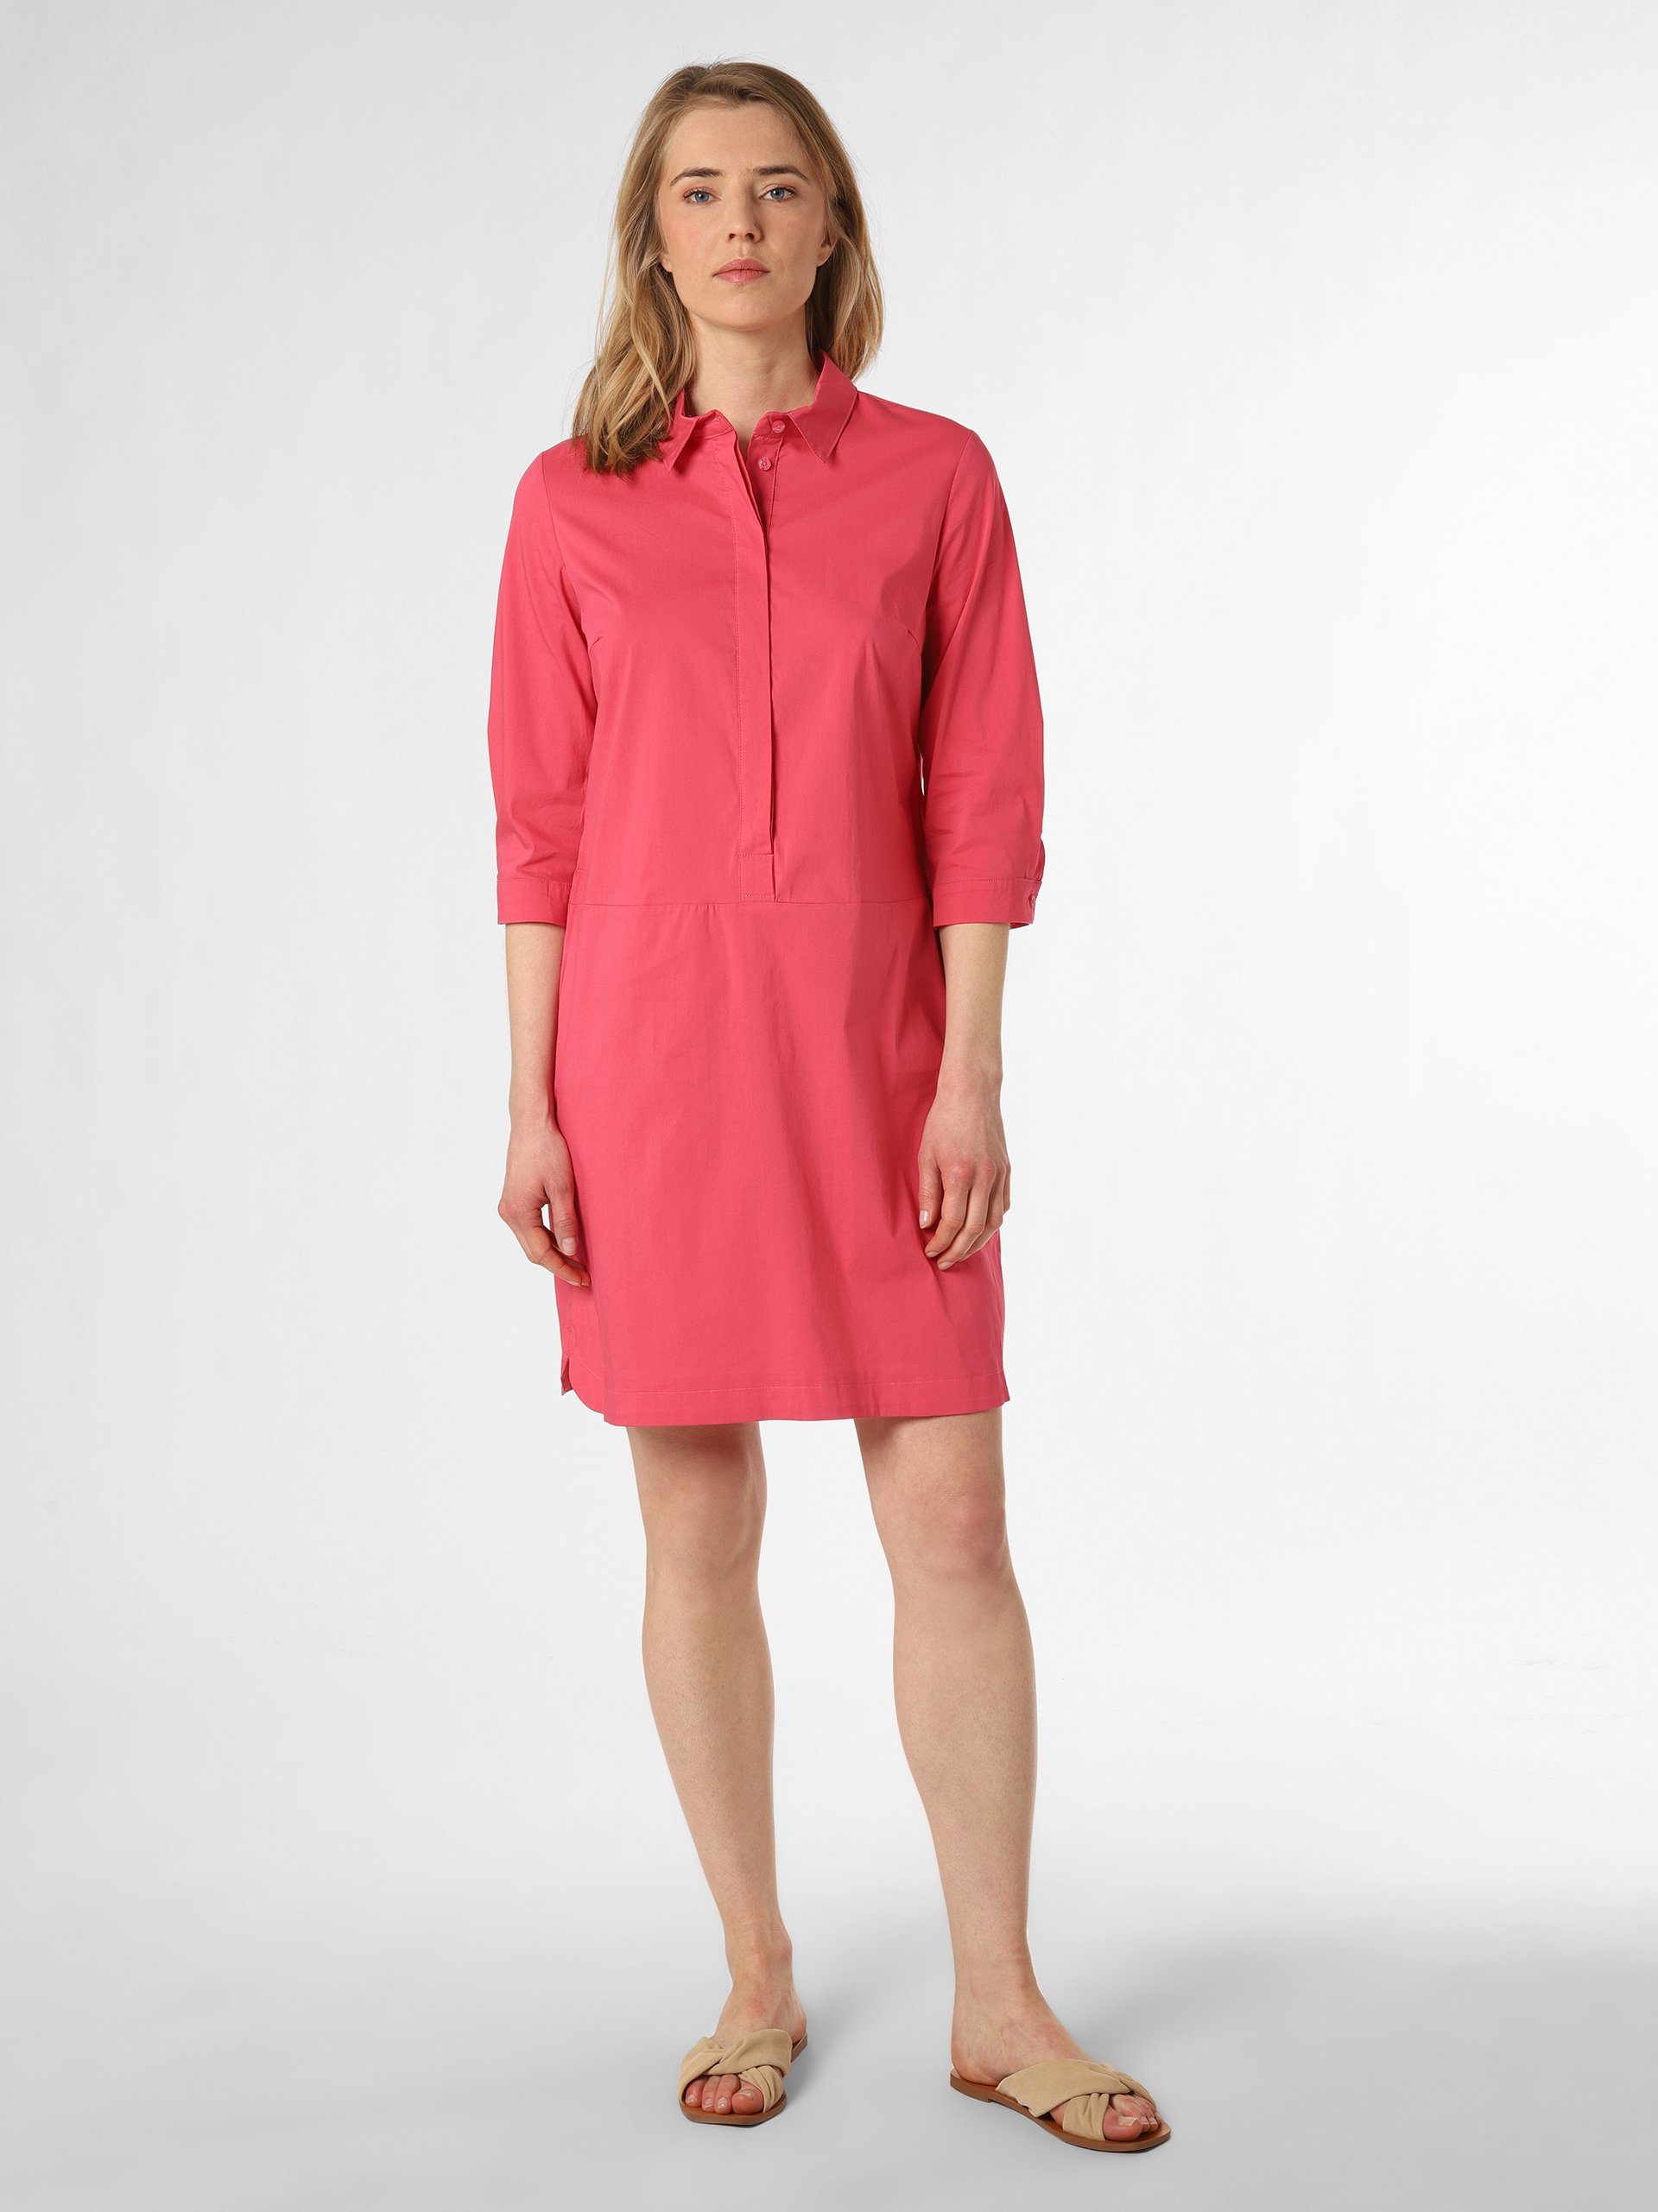 Betty Barclay A-Linien-Kleid pink